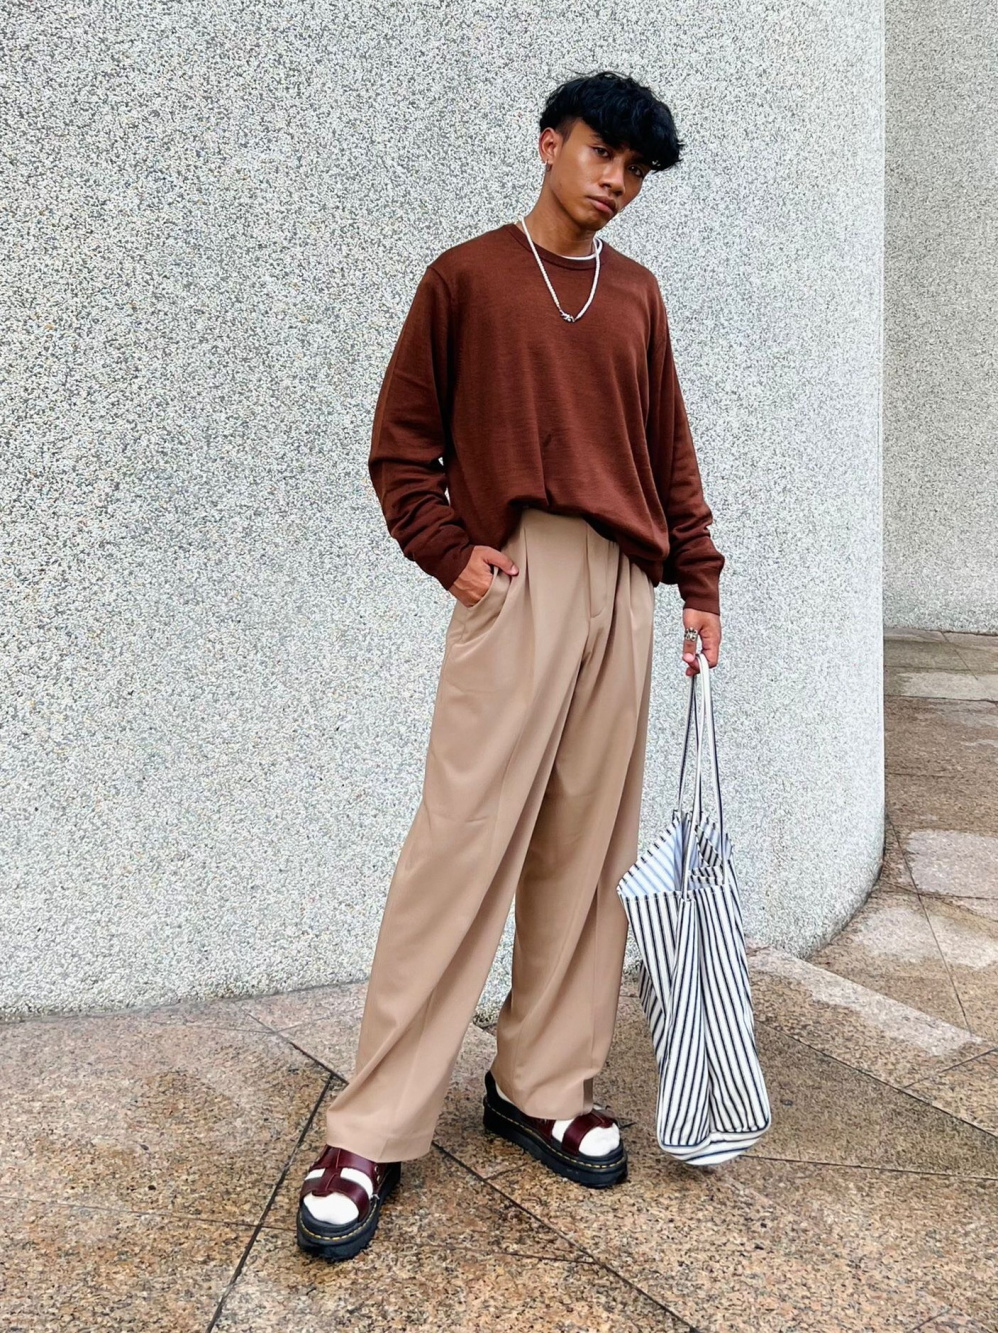 Check styling ideas for「COTTON LONG SLEEVE SHIRT、PLEATED WIDE PANTS」